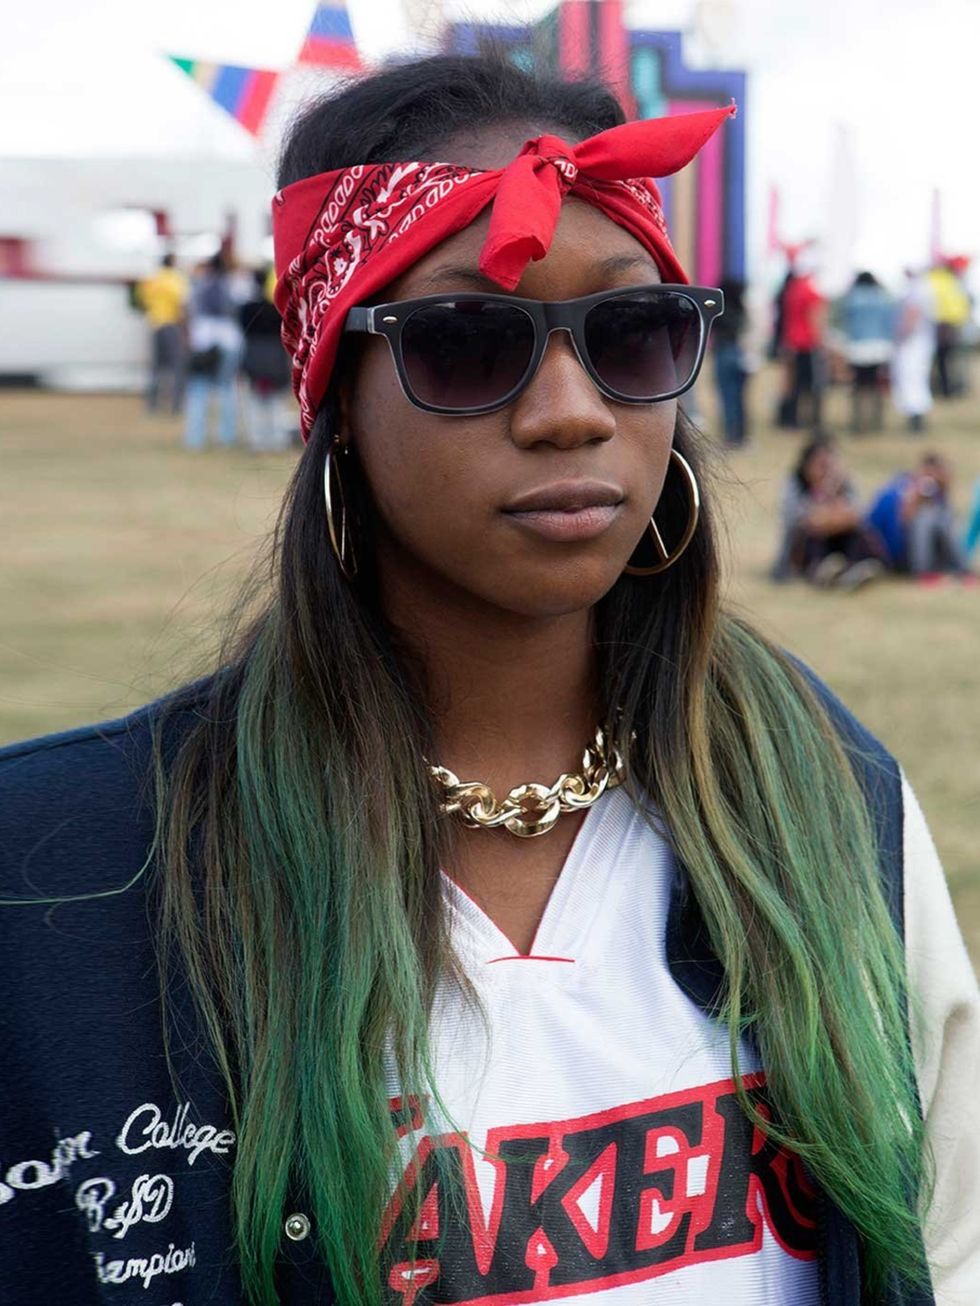 <p>Lacy Safo wears vintage jacket, Retro Café jersey and Doctor Martin boots.</p><p>For other festival street style see...</p><p><a href="http://www.elleuk.com/style/street-style/secret-garden-party-street-style-2013">Secret Garden Party Street Style</a><